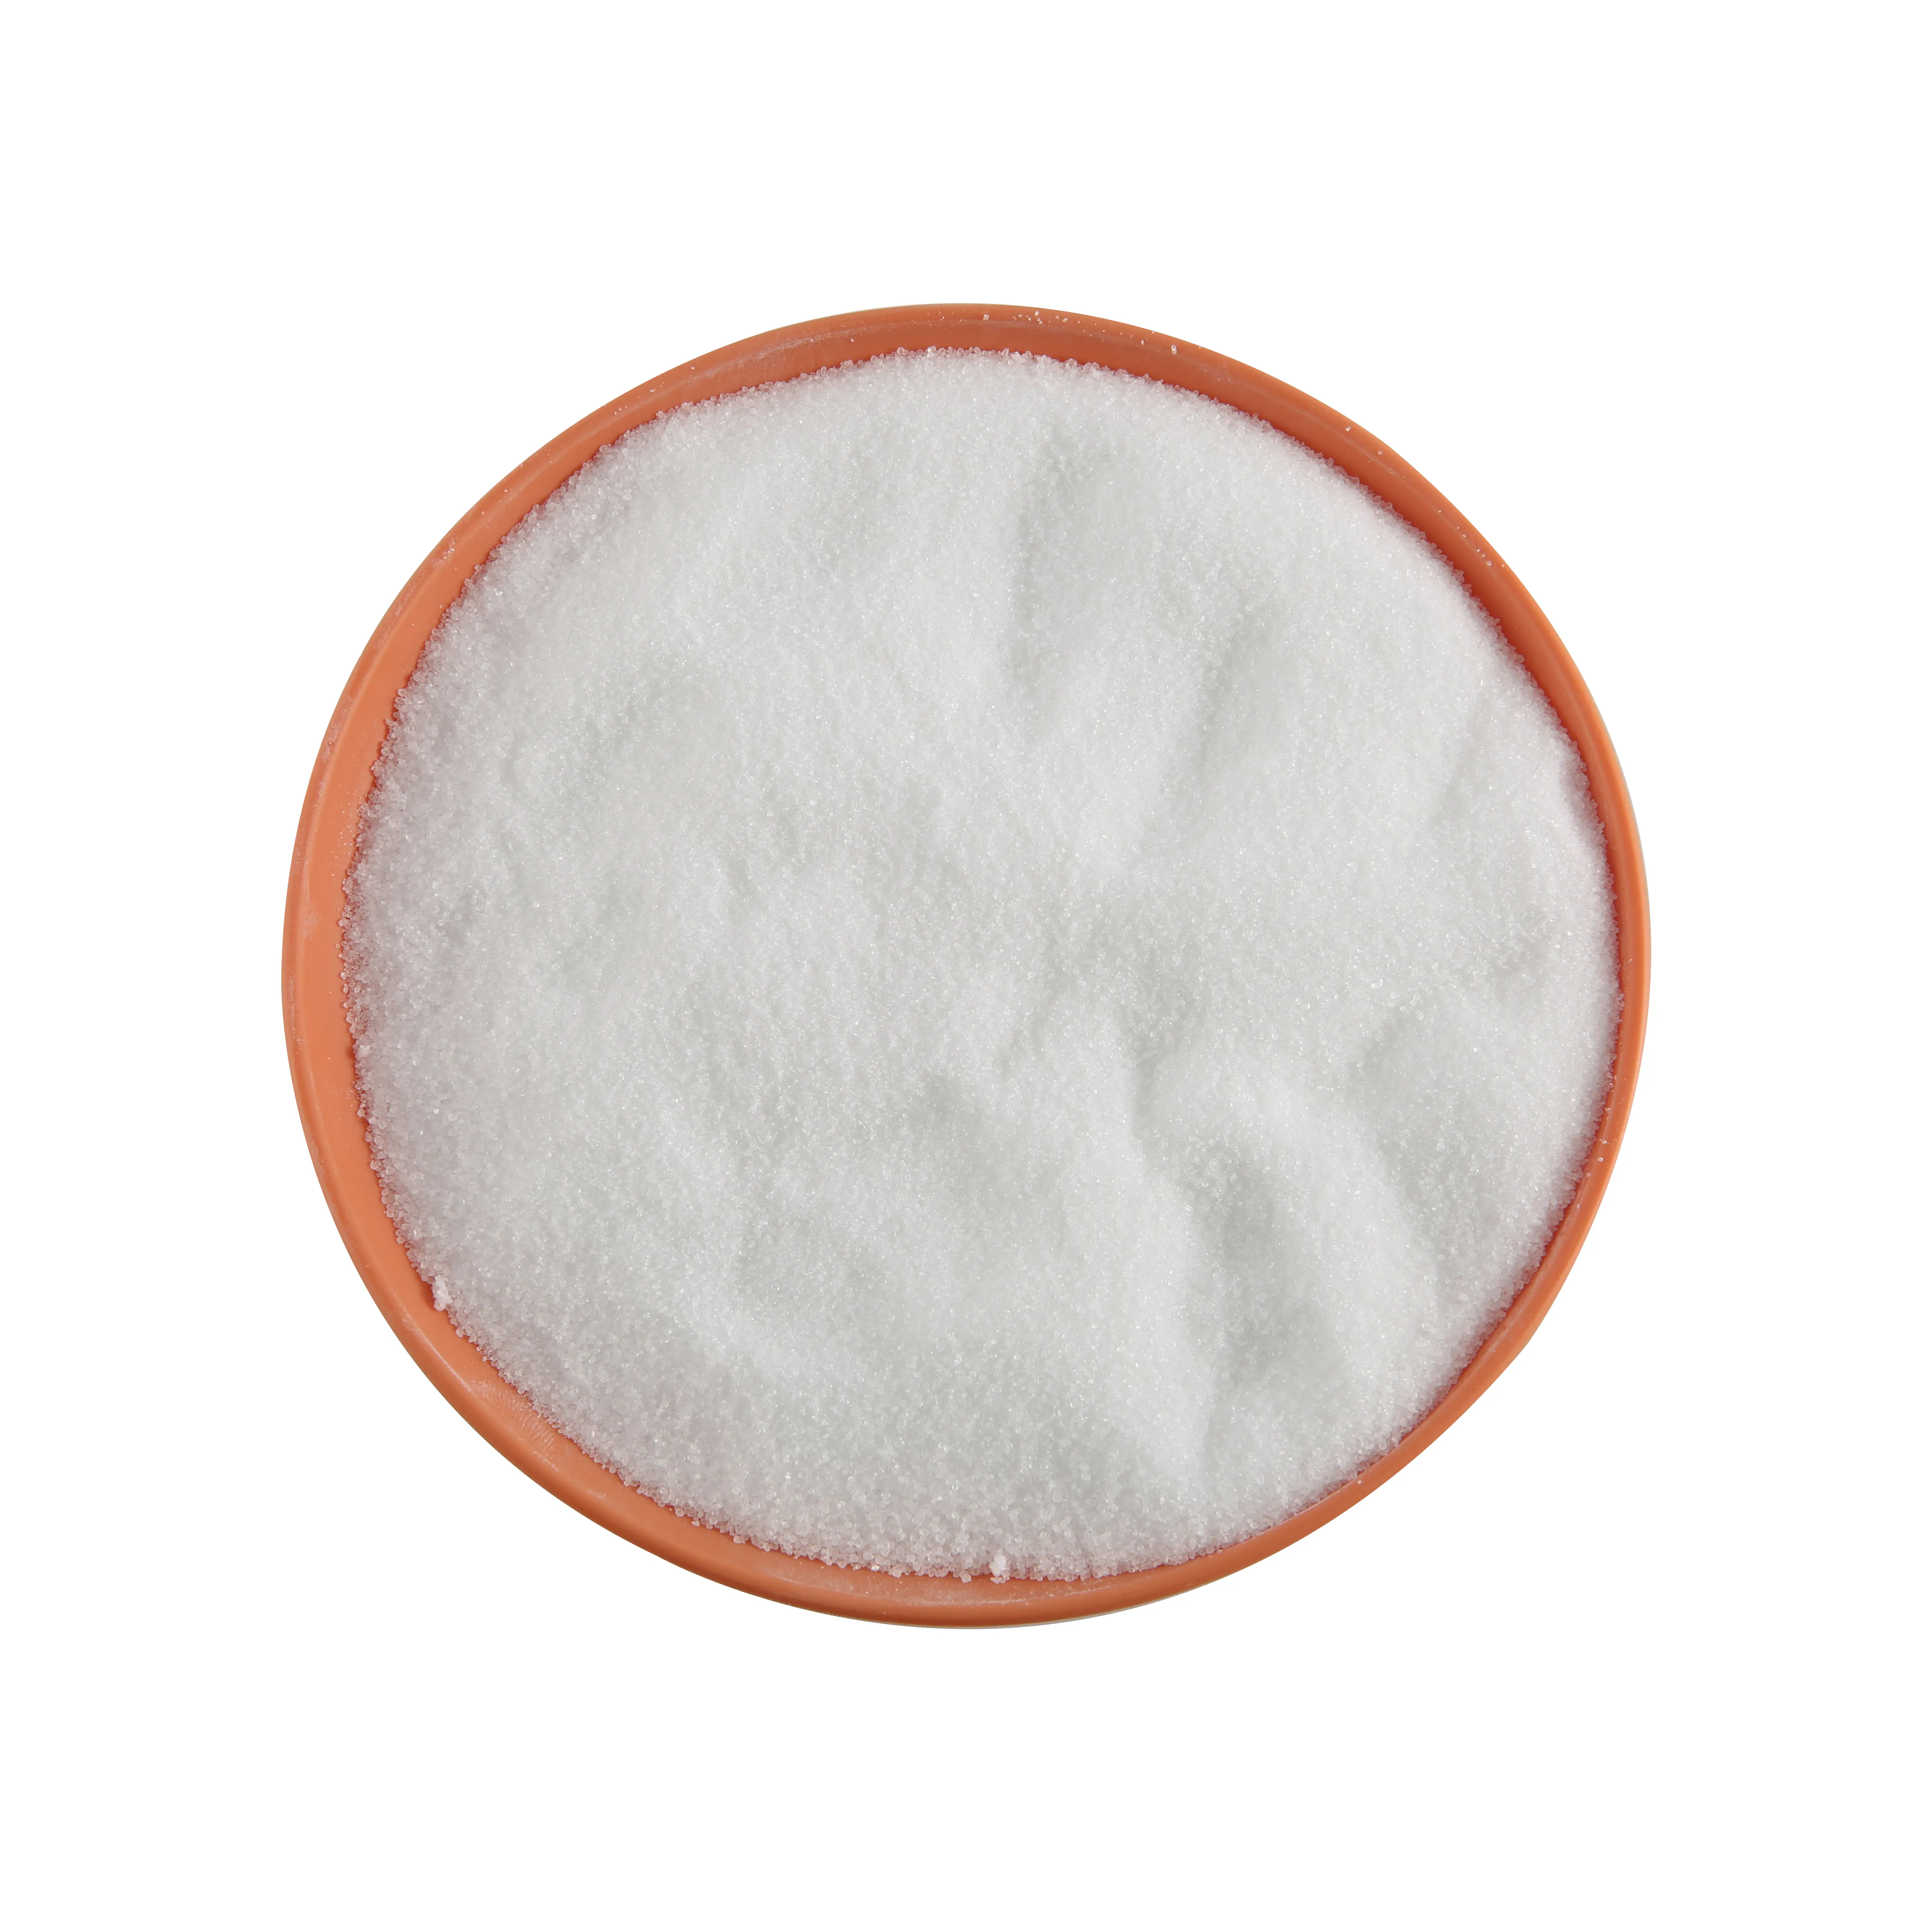 high quality citric acid anhydrous powder citric acid food grade anhydrous citric acid